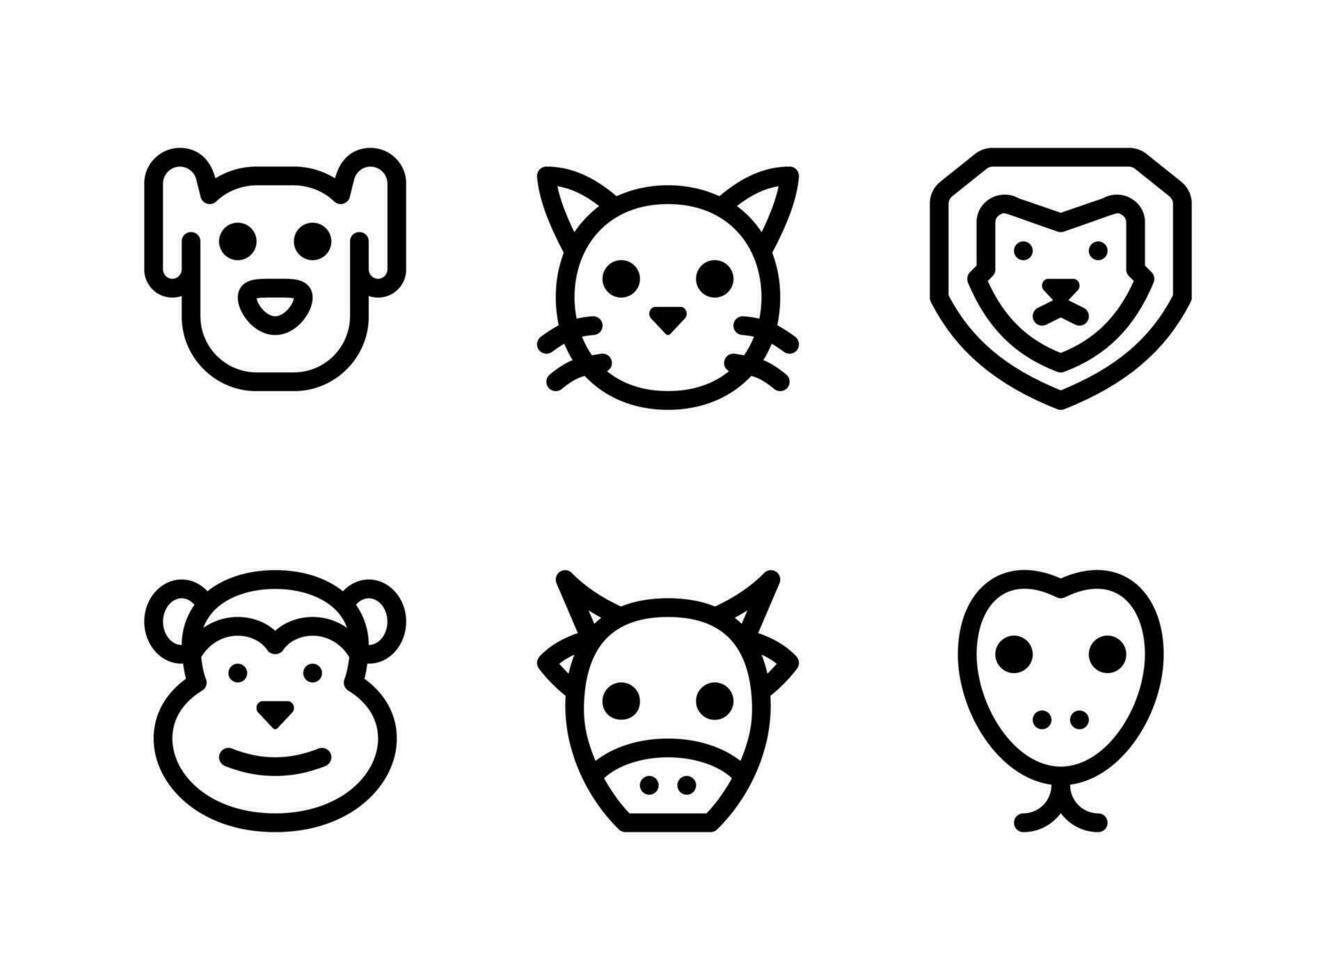 Simple Set of Animal Related Vector Line Icons. Contains Icons as Dog, Cat, Lion, Monkey and more.